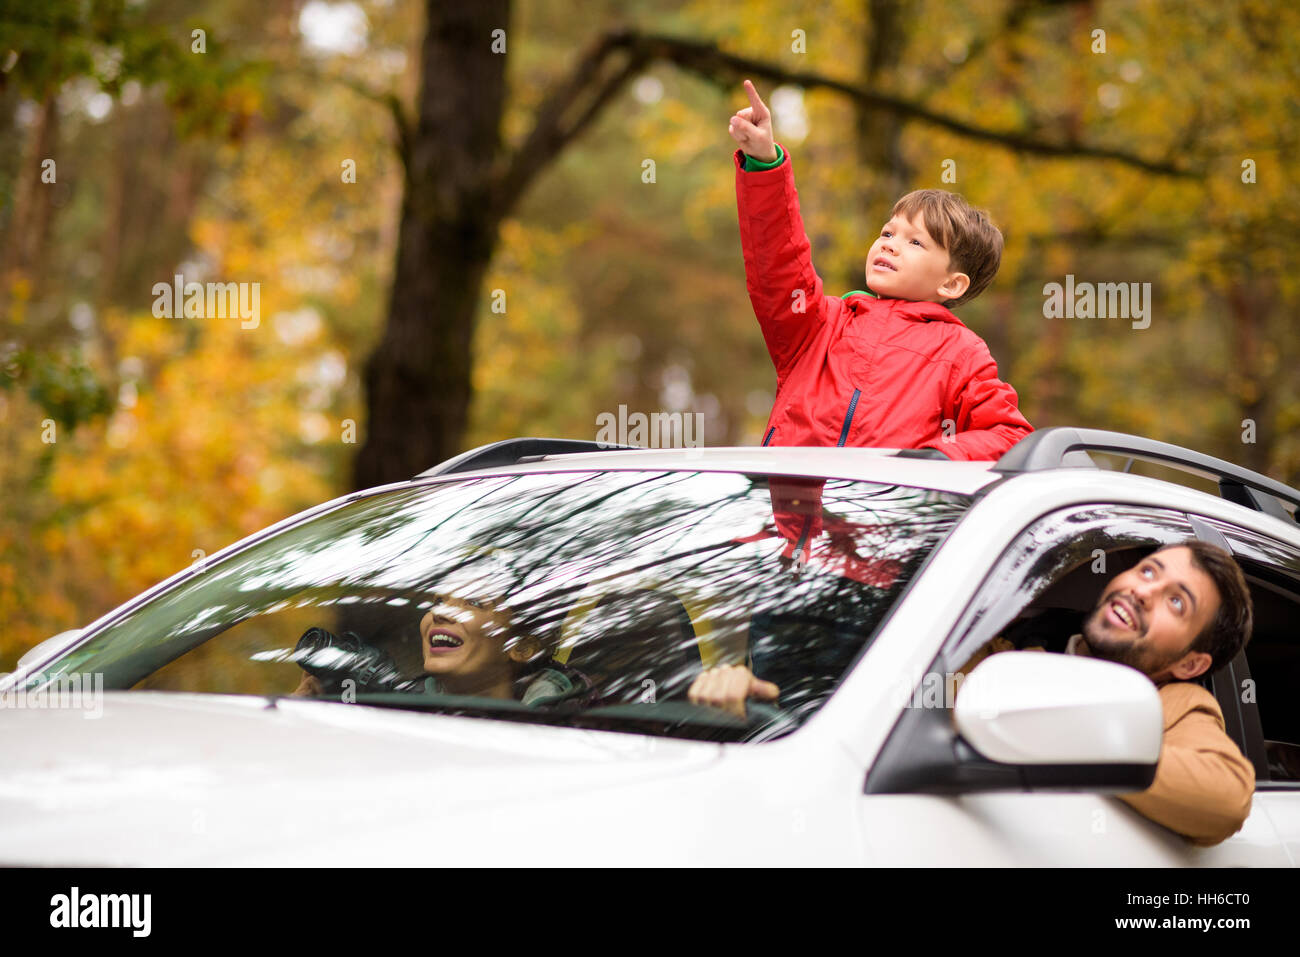 Adorable smiling boy standing in open car sunroof during family trip in autumn forest Stock Photo